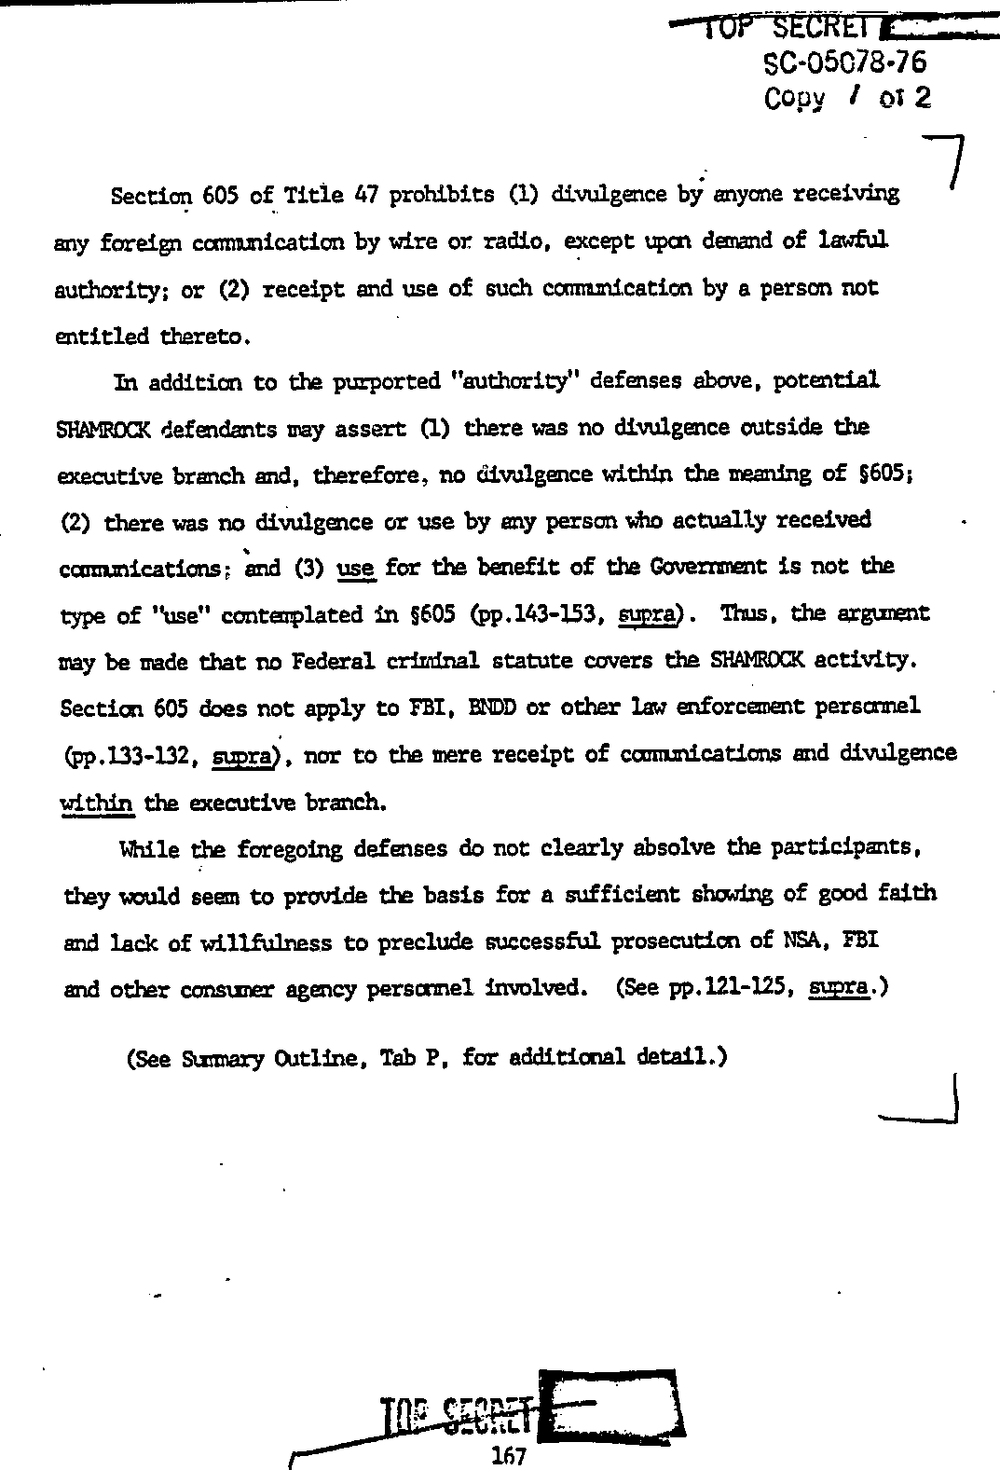 Page 175 from Report on Inquiry Into CIA Related Electronic Surveillance Activities